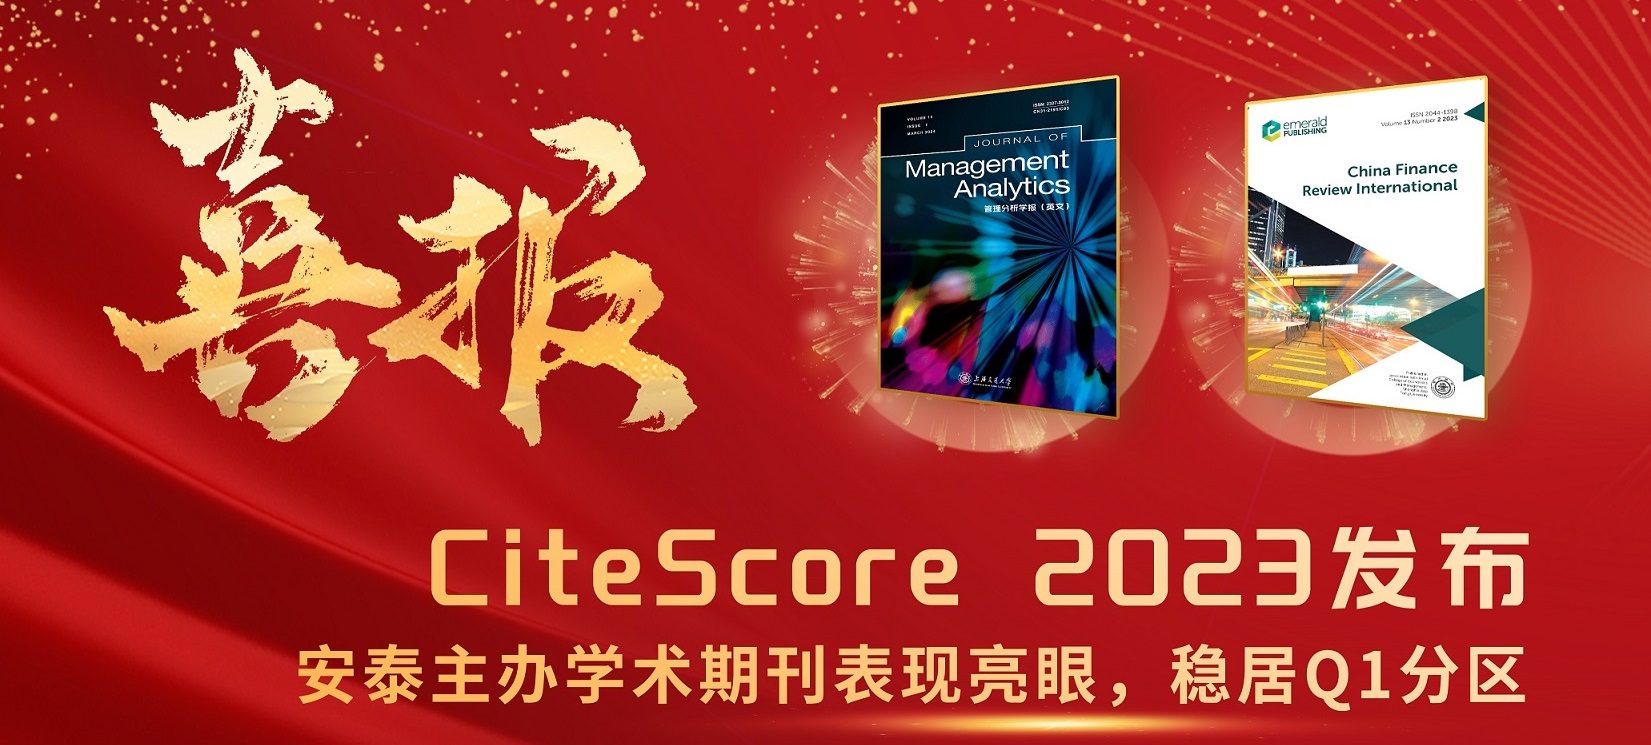 CiteScore 2023 Released: Two International Academic Journals Hosted by Antai Shine Brightly, Firmly Positioned in Q1 Category